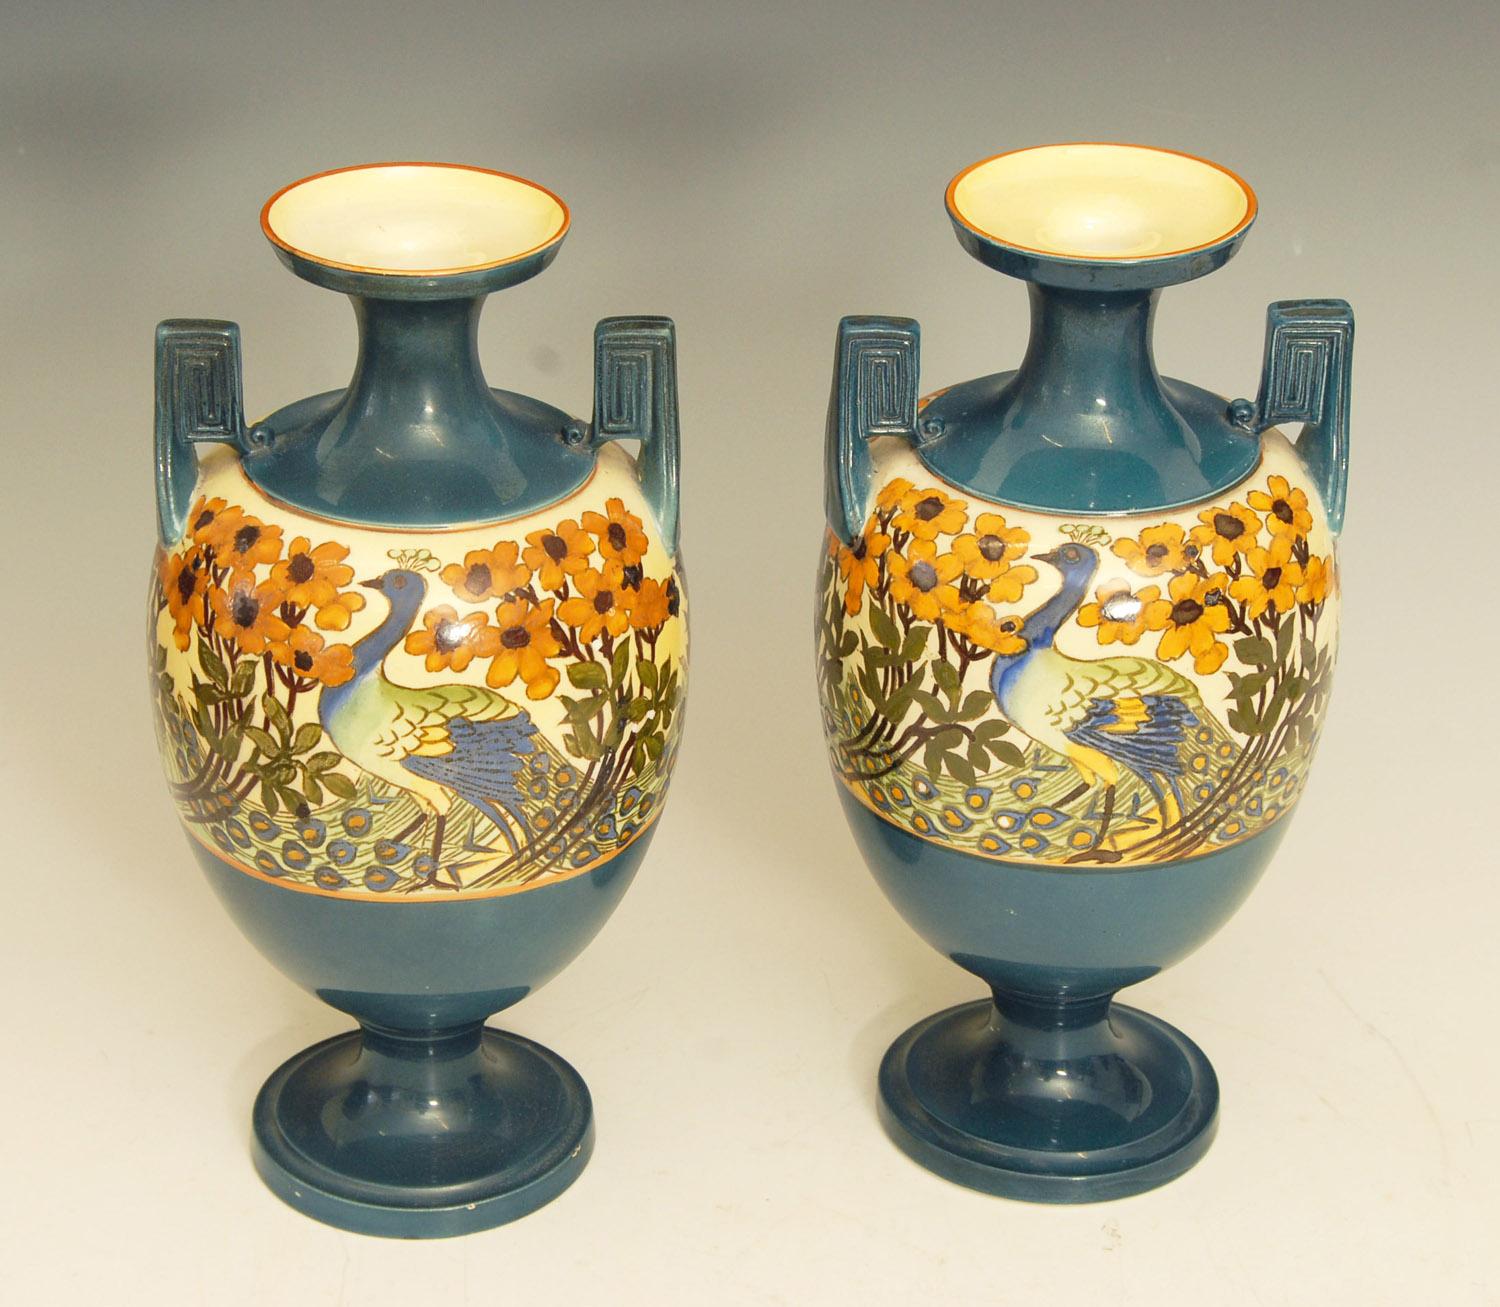 Pair of Art Nouveau Royal Staffordshire twin handled vases with hand painted peacocks.

Price includes shipping to anywhere in the world.